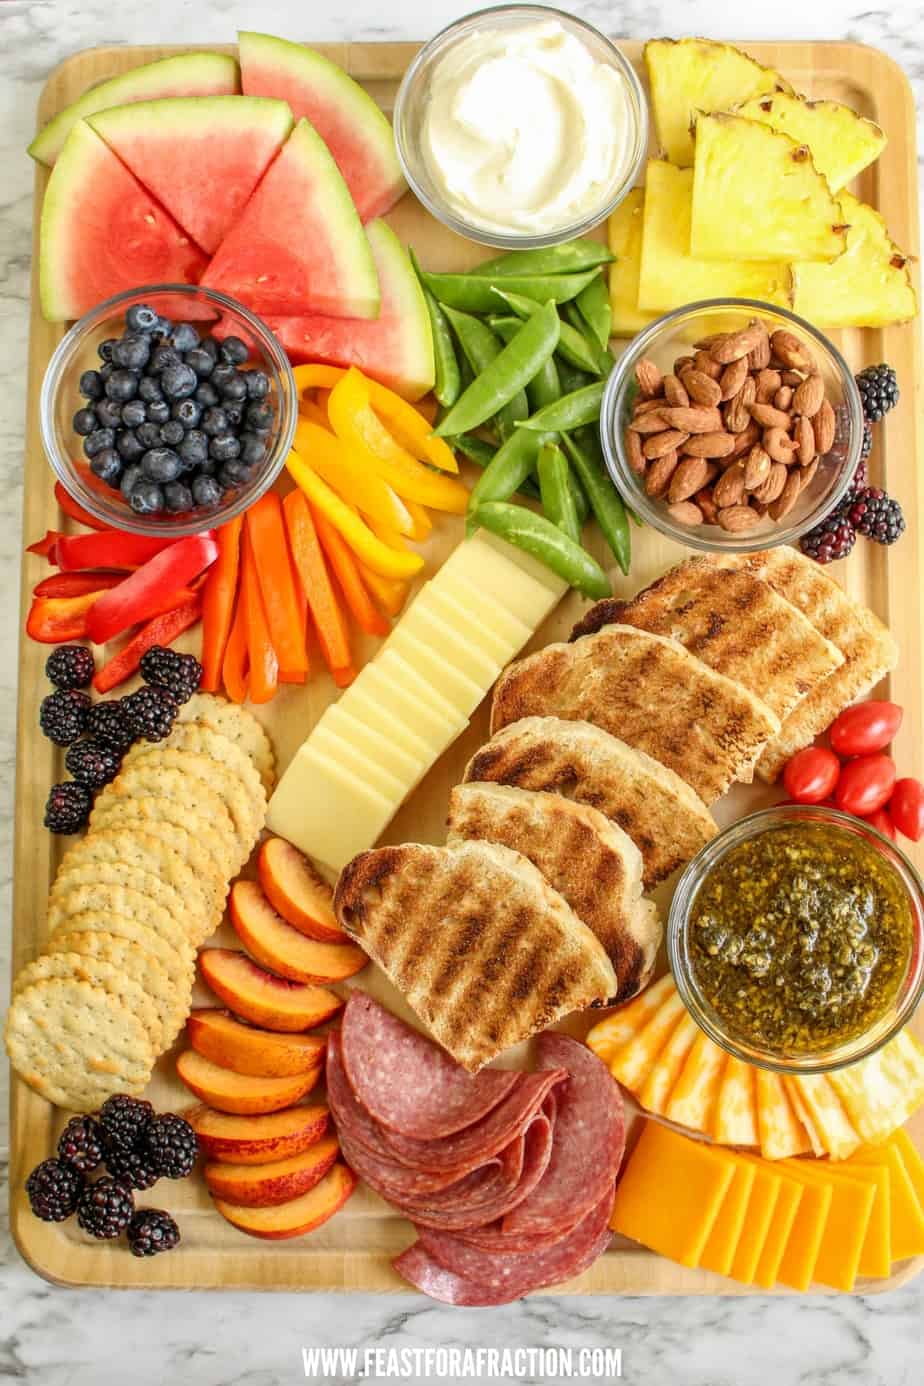 How to Make a Charcuterie Board on a Budget  